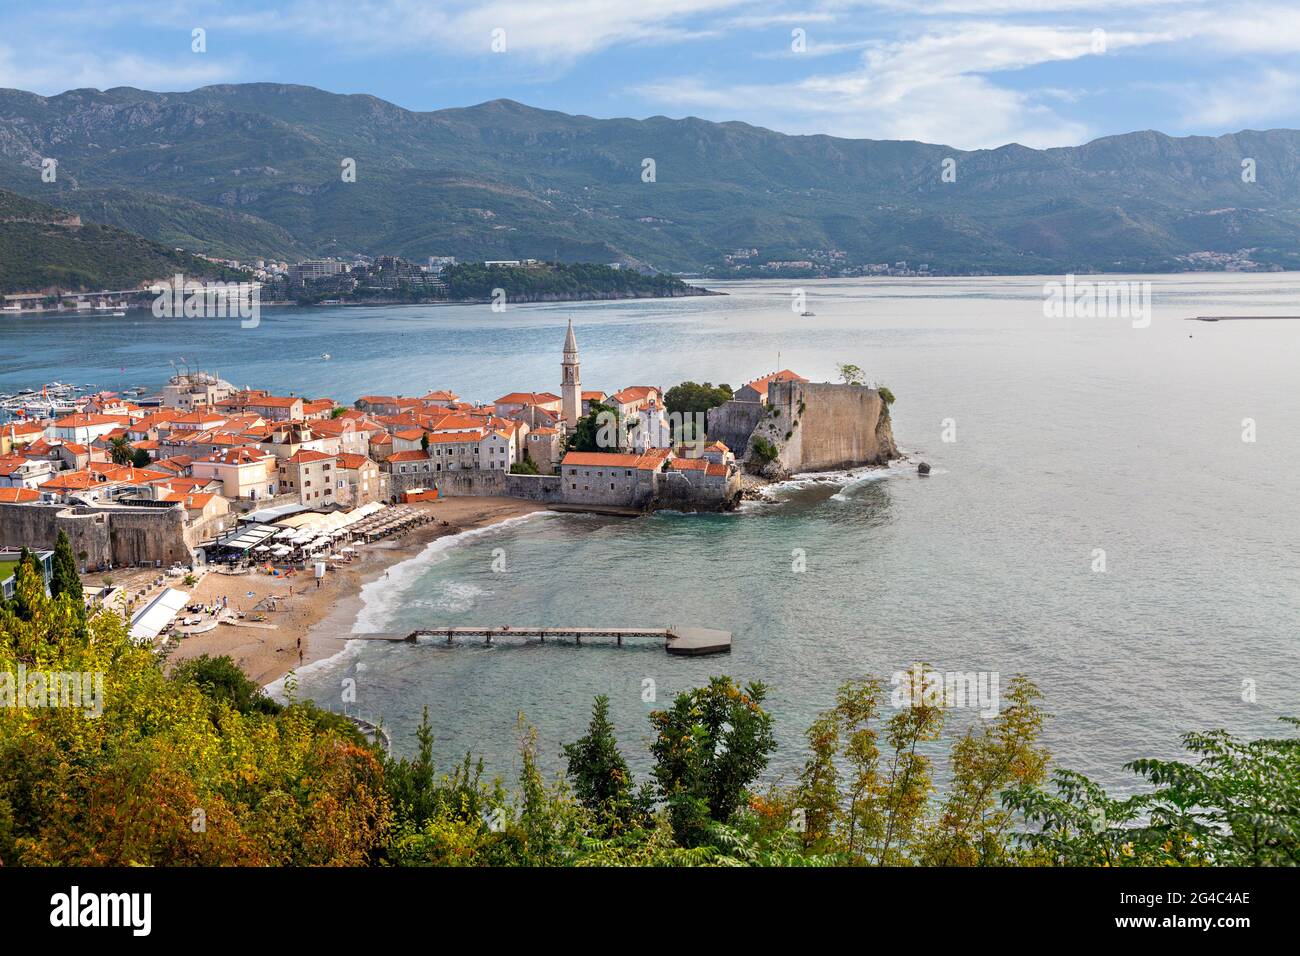 View over the old town of Budva in Montenegro Stock Photo